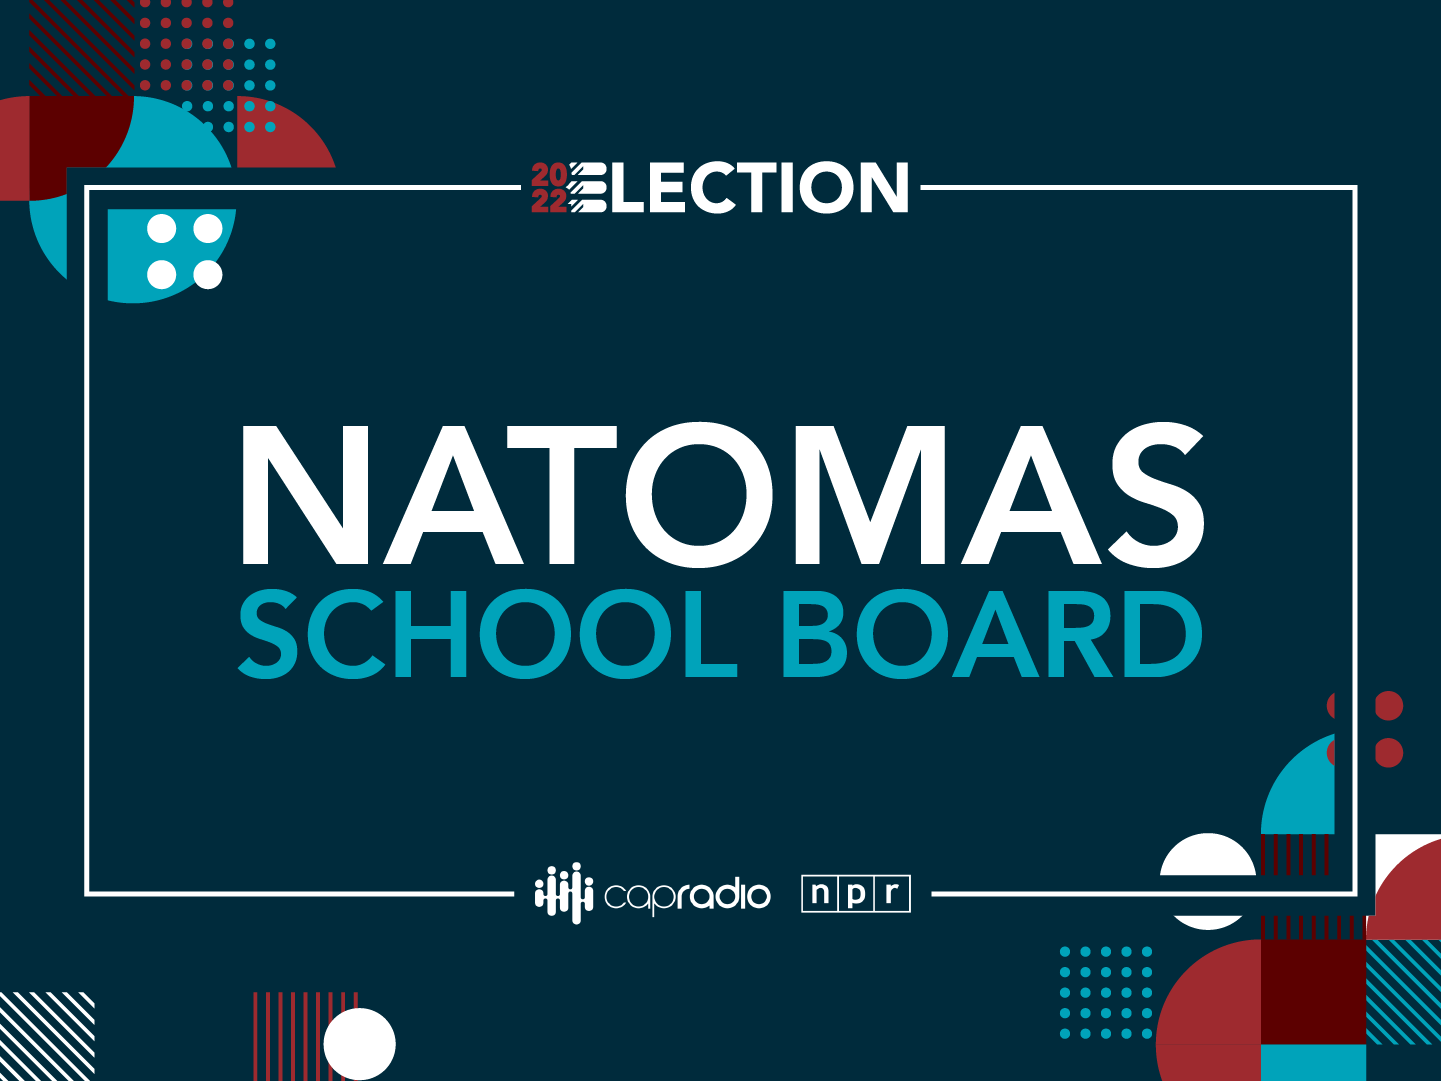 Who is running for the Natomas Unified School Board in the November election